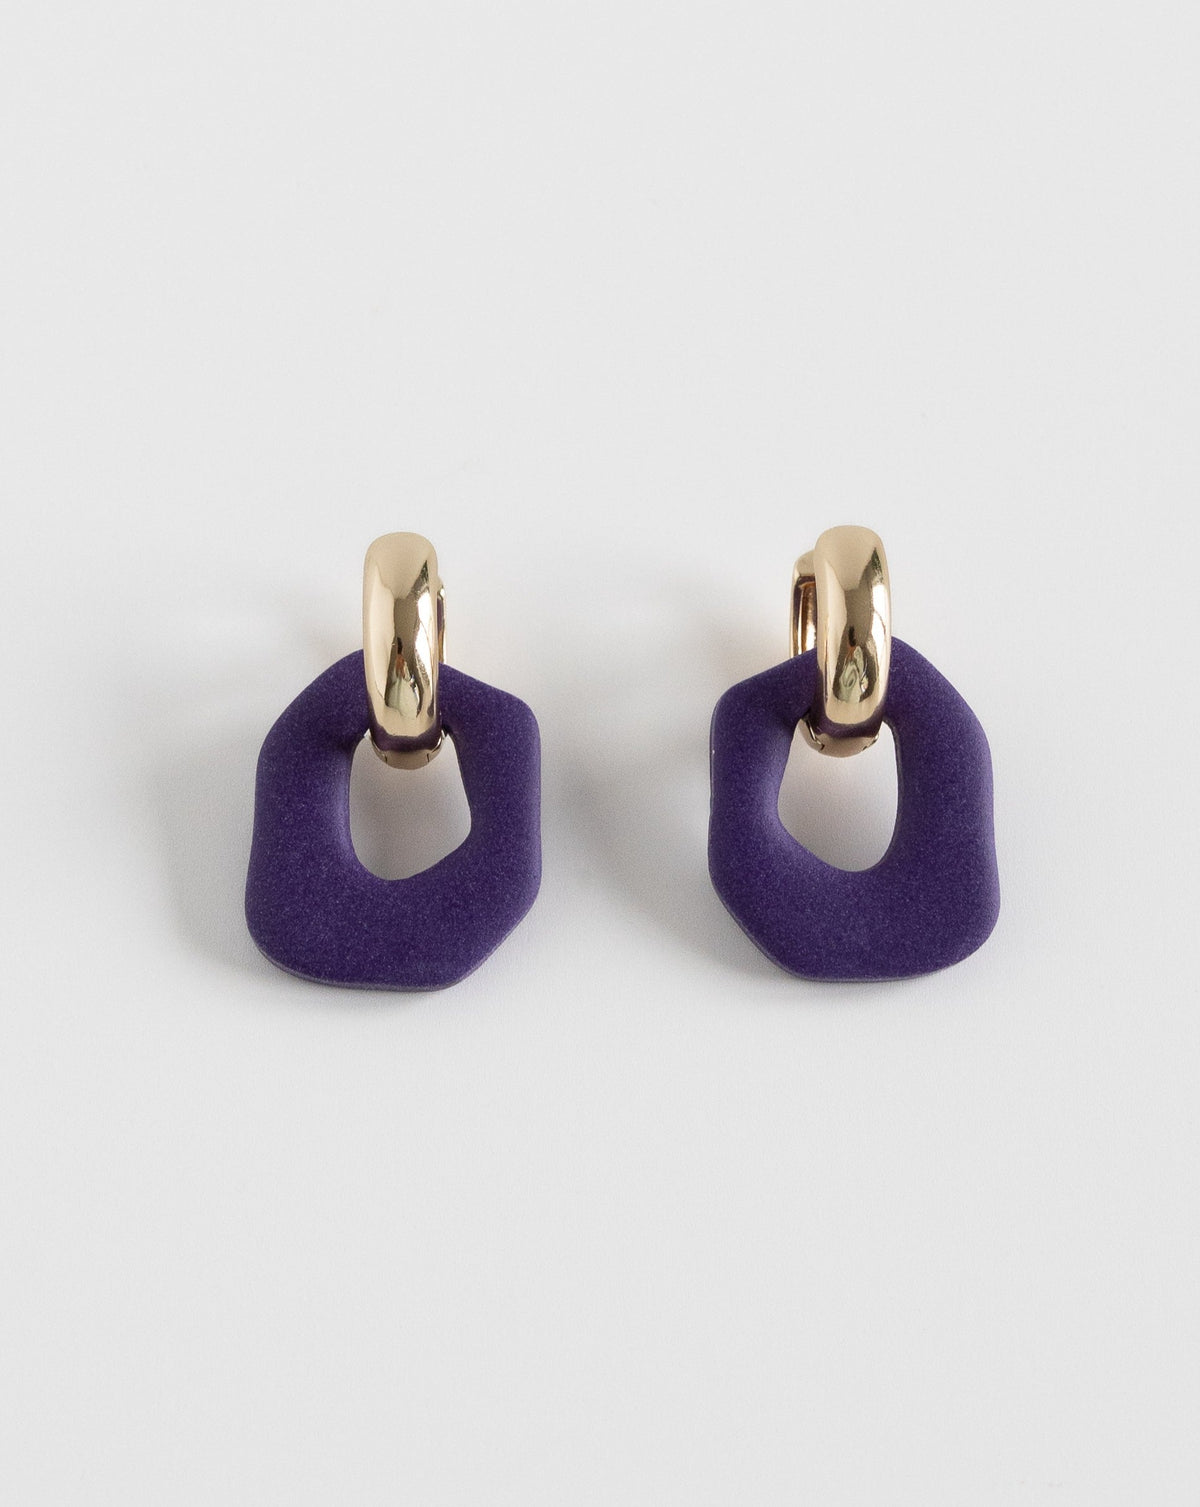 Darien earrings in Purple color with gold hoops, front view